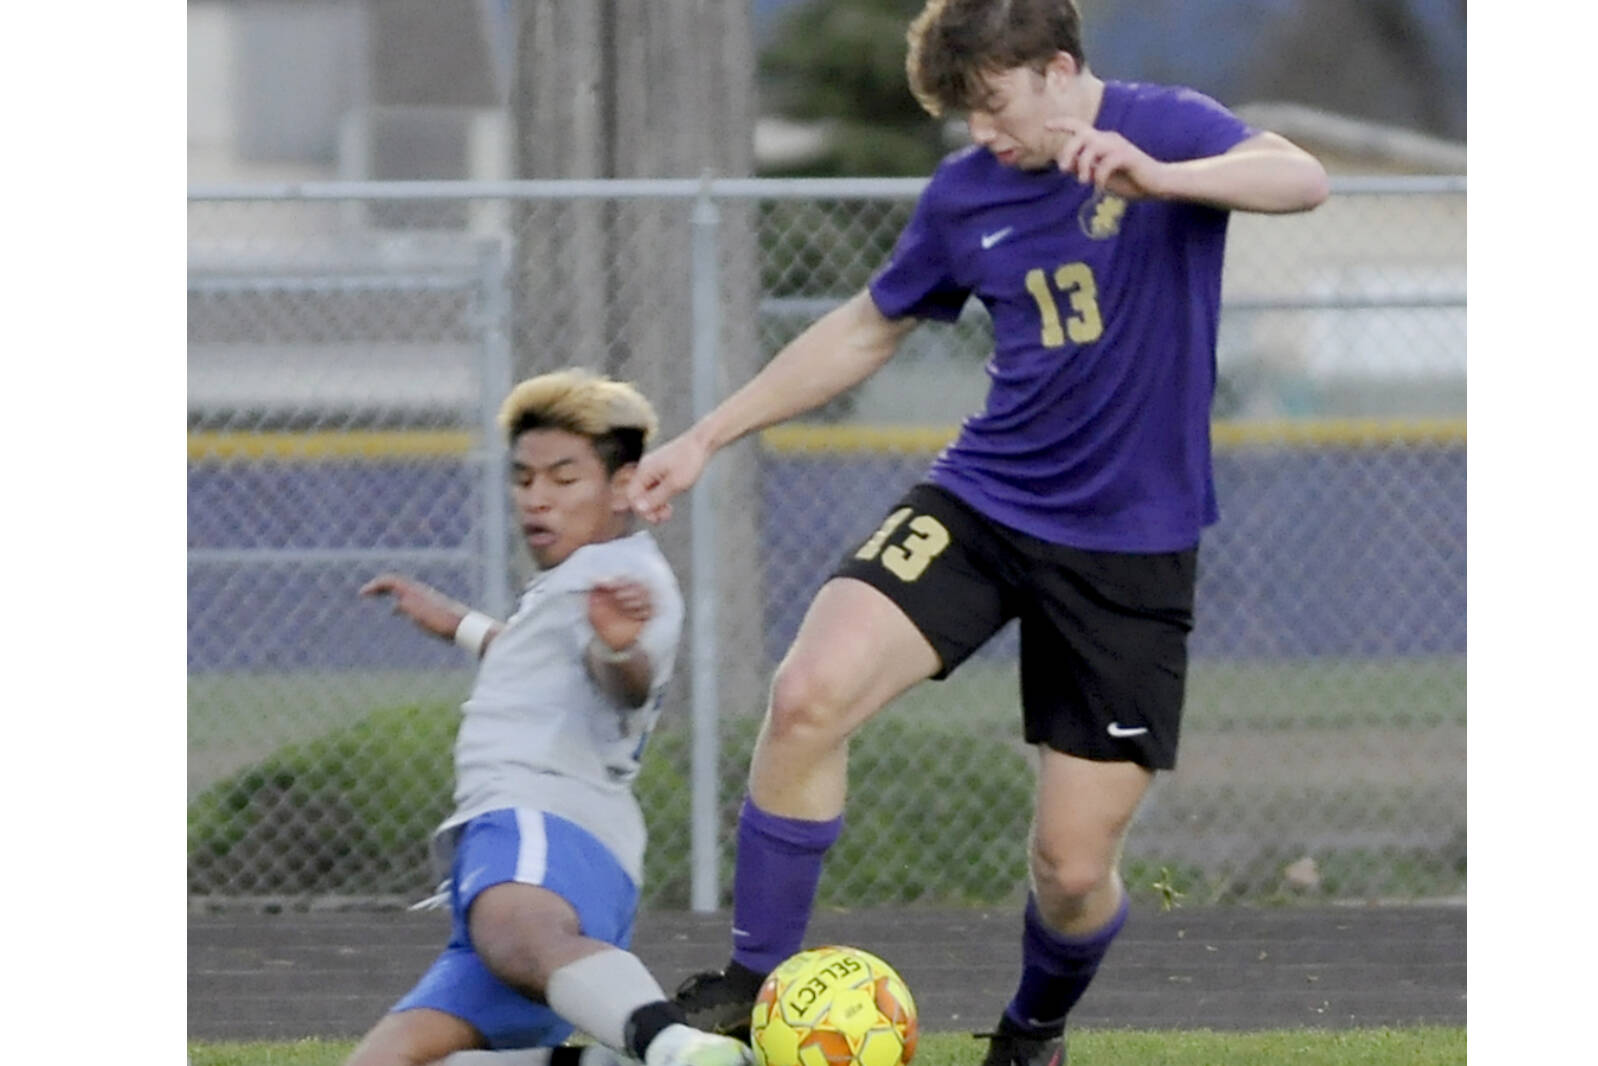 Michael Dashiell/Olympic Peninsula News Group
Sequim's Brandon Charters battles for the ball with a North Mason defender in the Wolves' 4-0 win Tuesday night in Sequim.